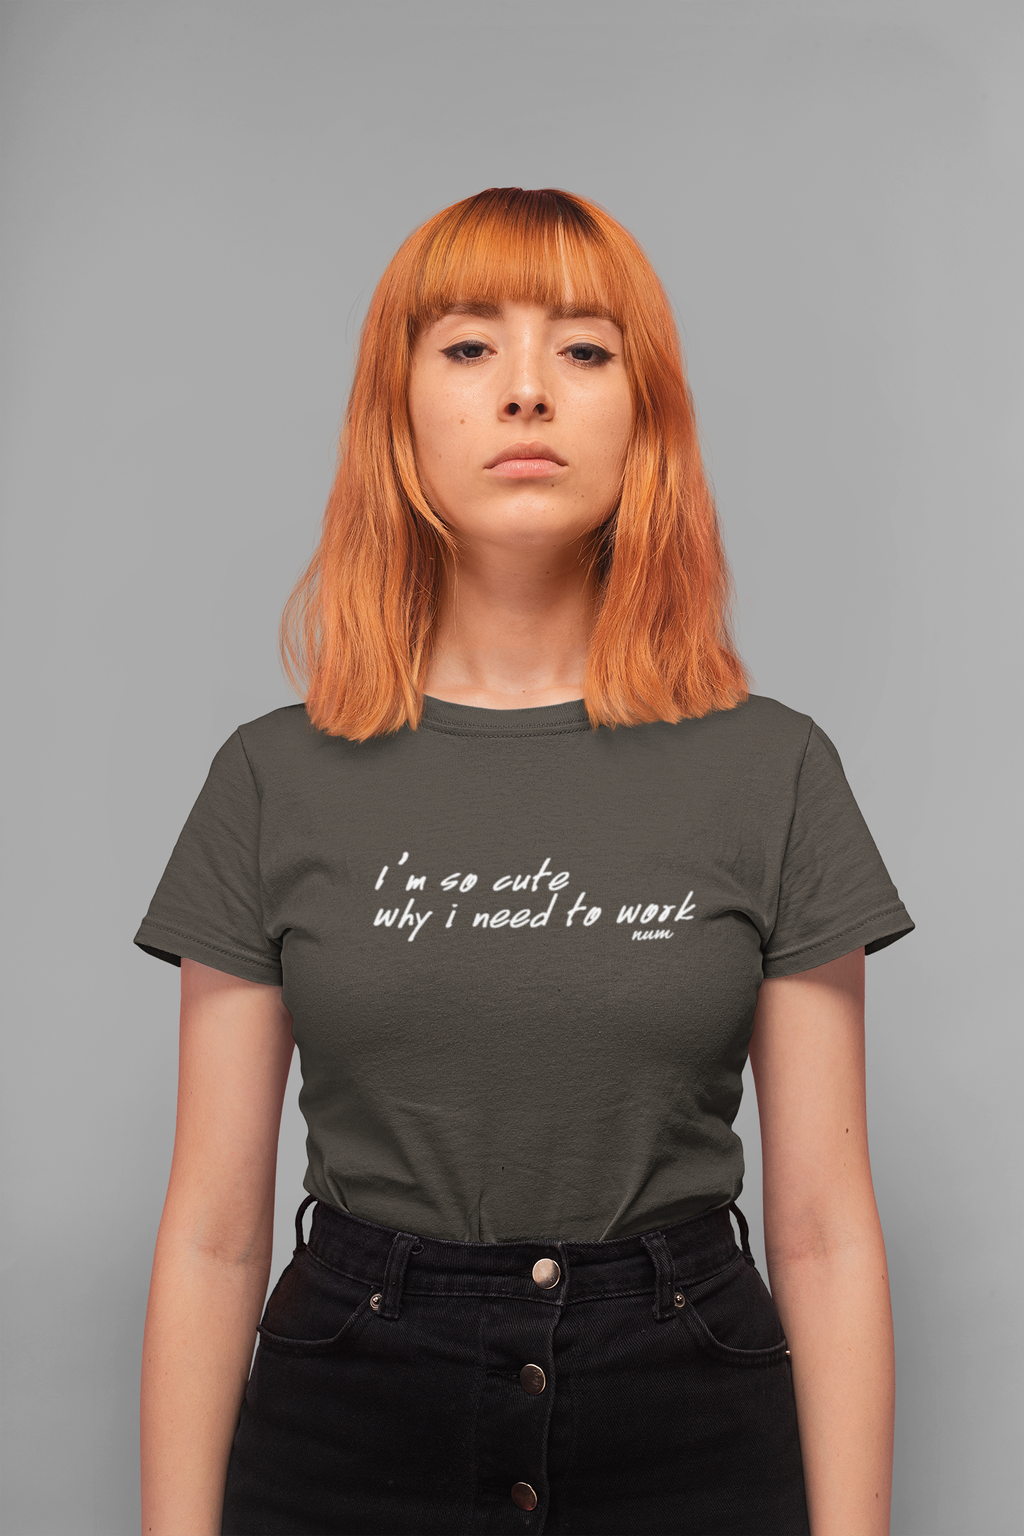 t-shirt-mockup-of-a-serious-faced-girl-standing-in-a-studio-20844.png